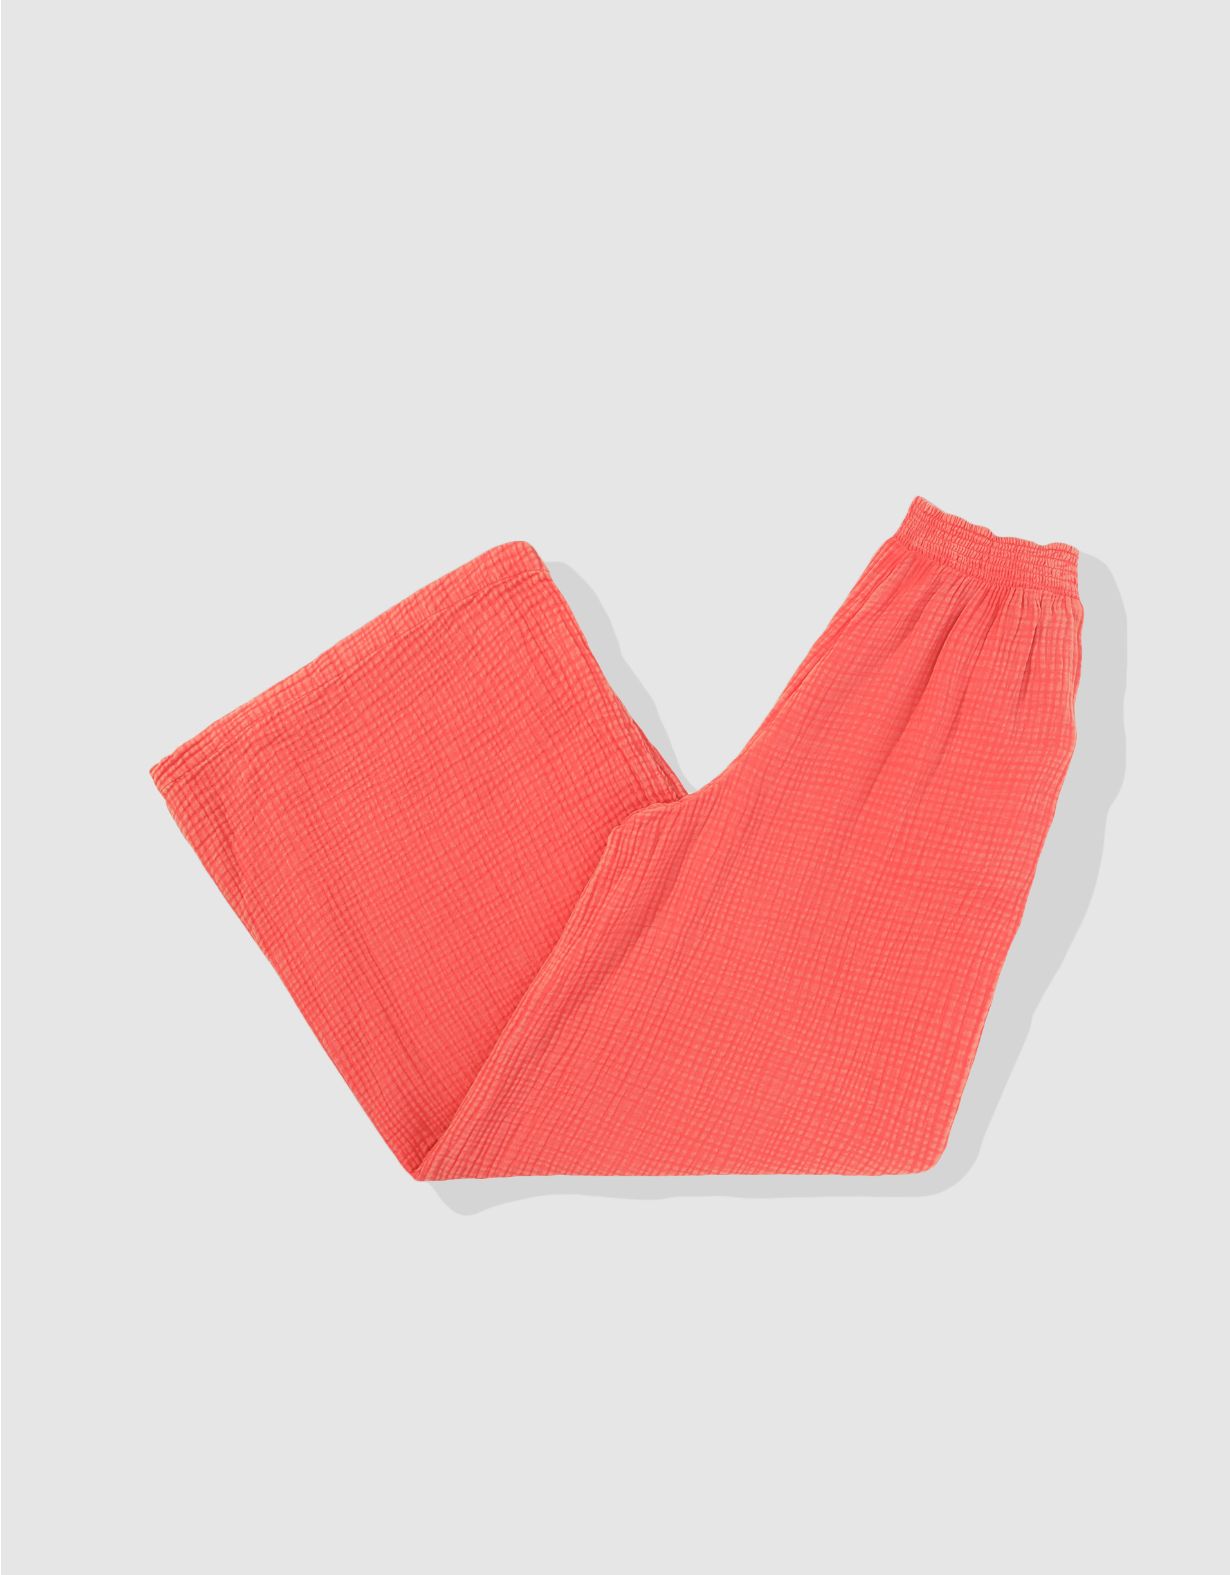 Aerie High Waisted Pool-To-Party Pant